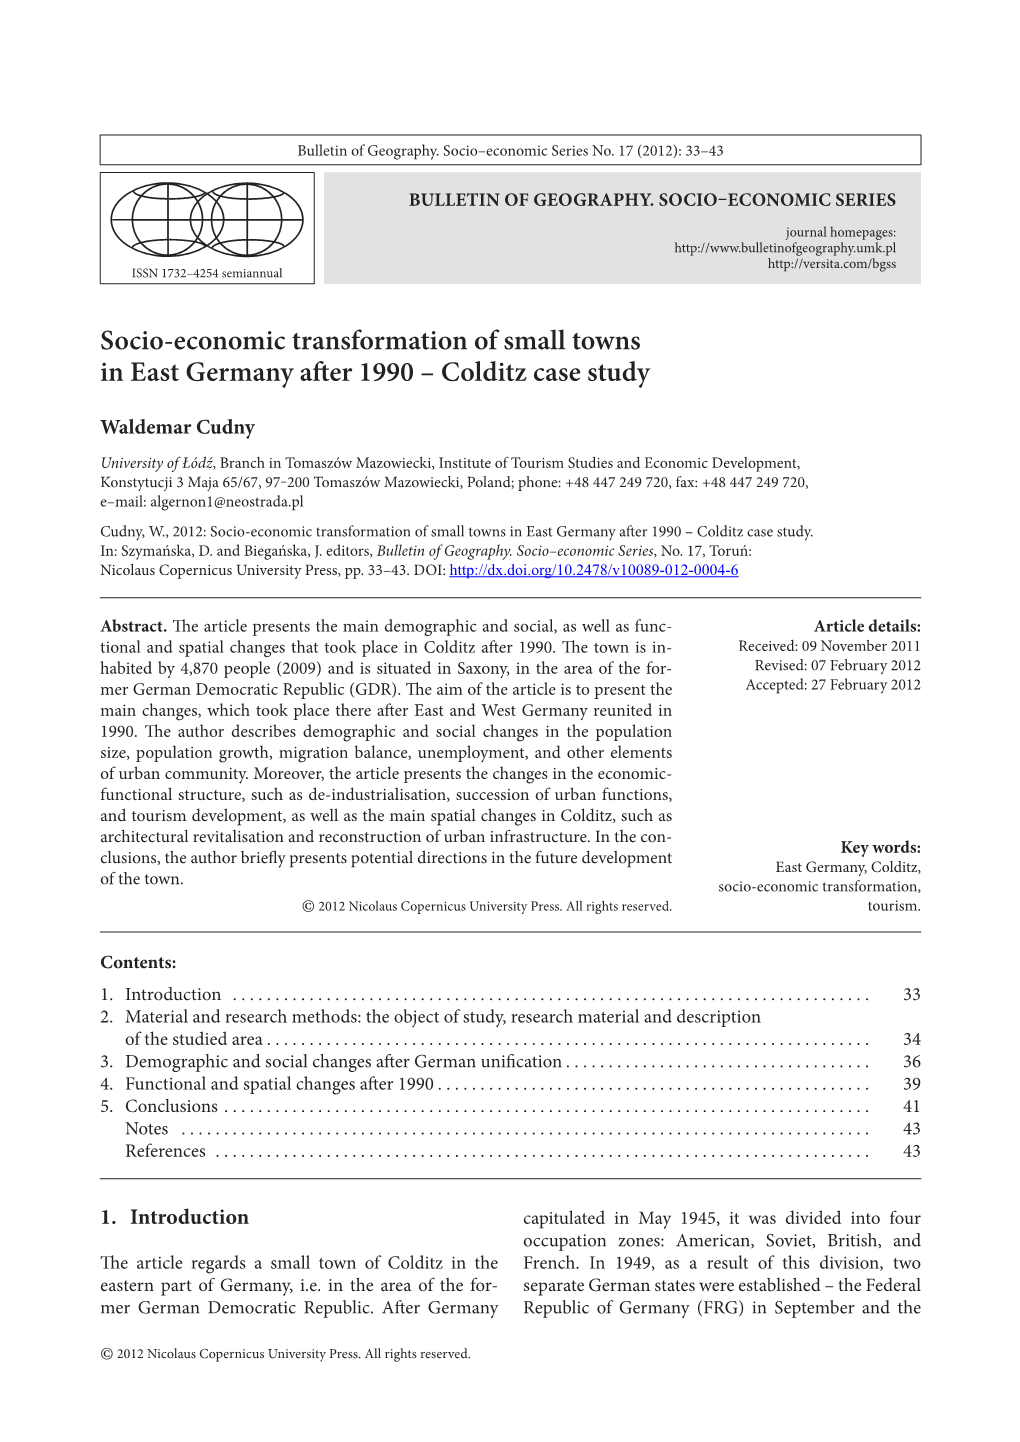 Socio-Economic Transformation of Small Towns in East Germany After 1990 – Colditz Case Study